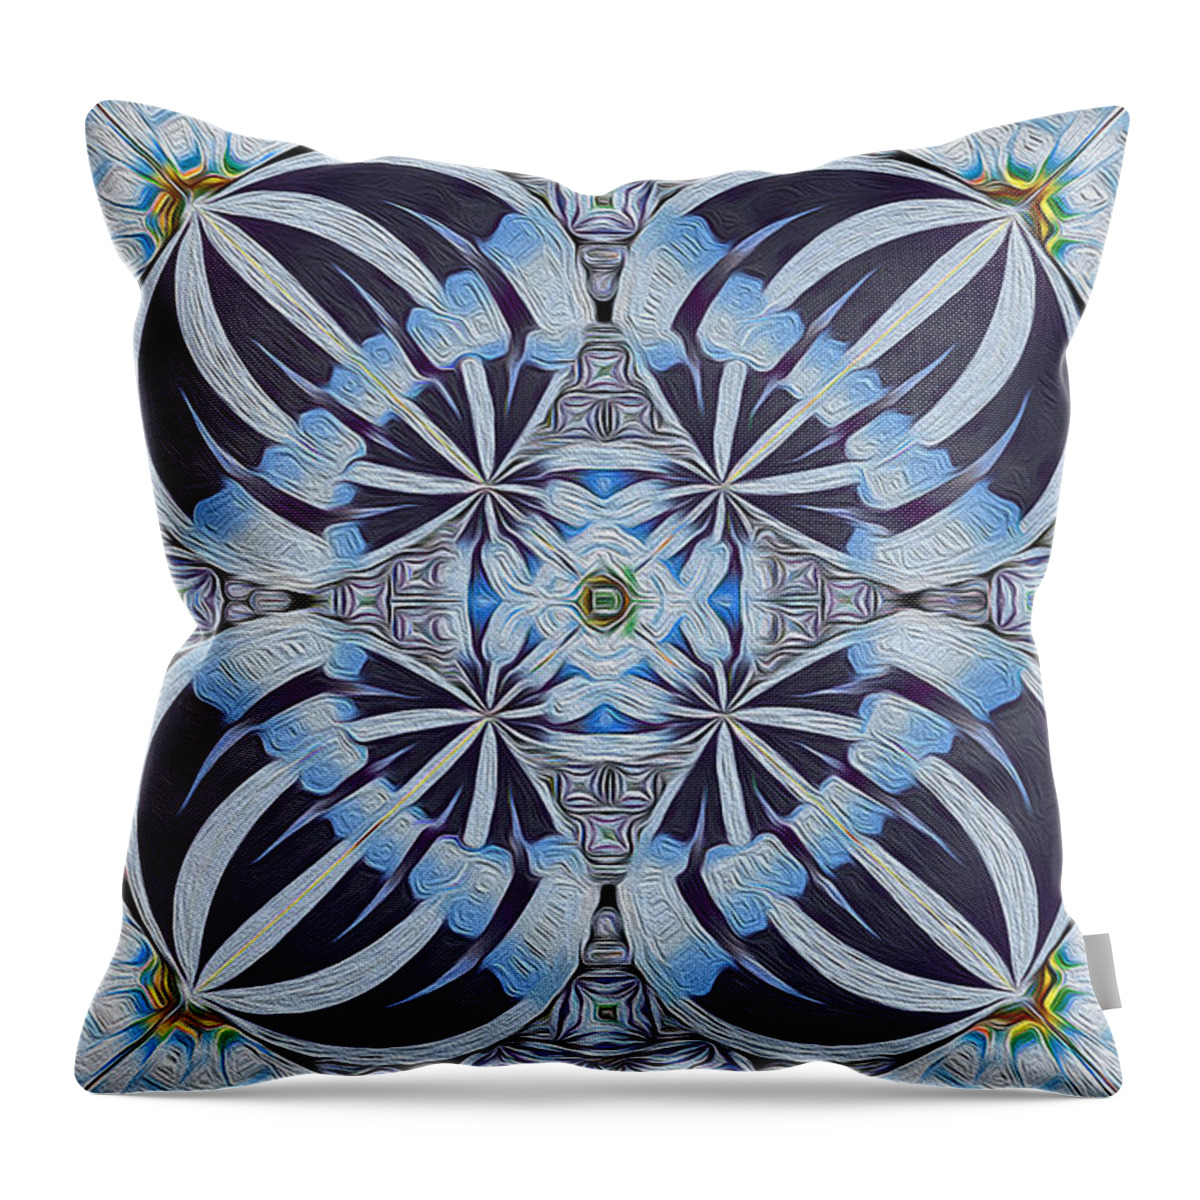 Abstract Throw Pillow featuring the digital art Winter Carnivale by Jim Pavelle